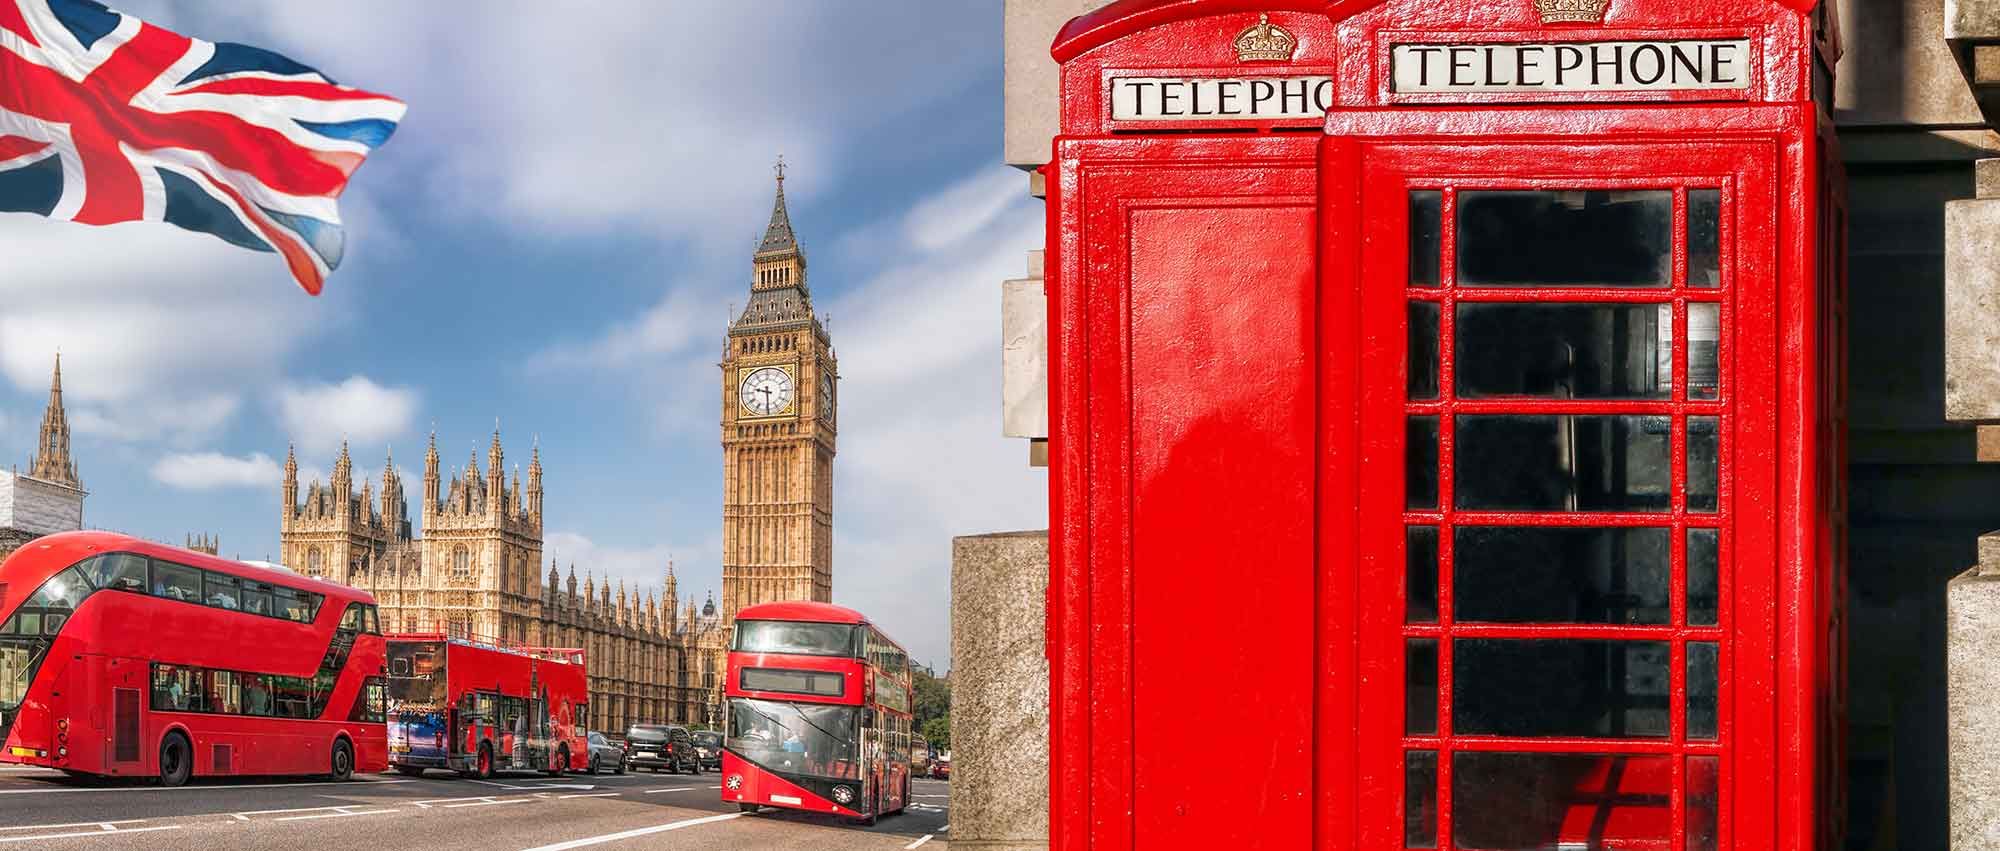 London - Discover Big Ben##Discover Tower Bridge##Discover Piccadilly Circus